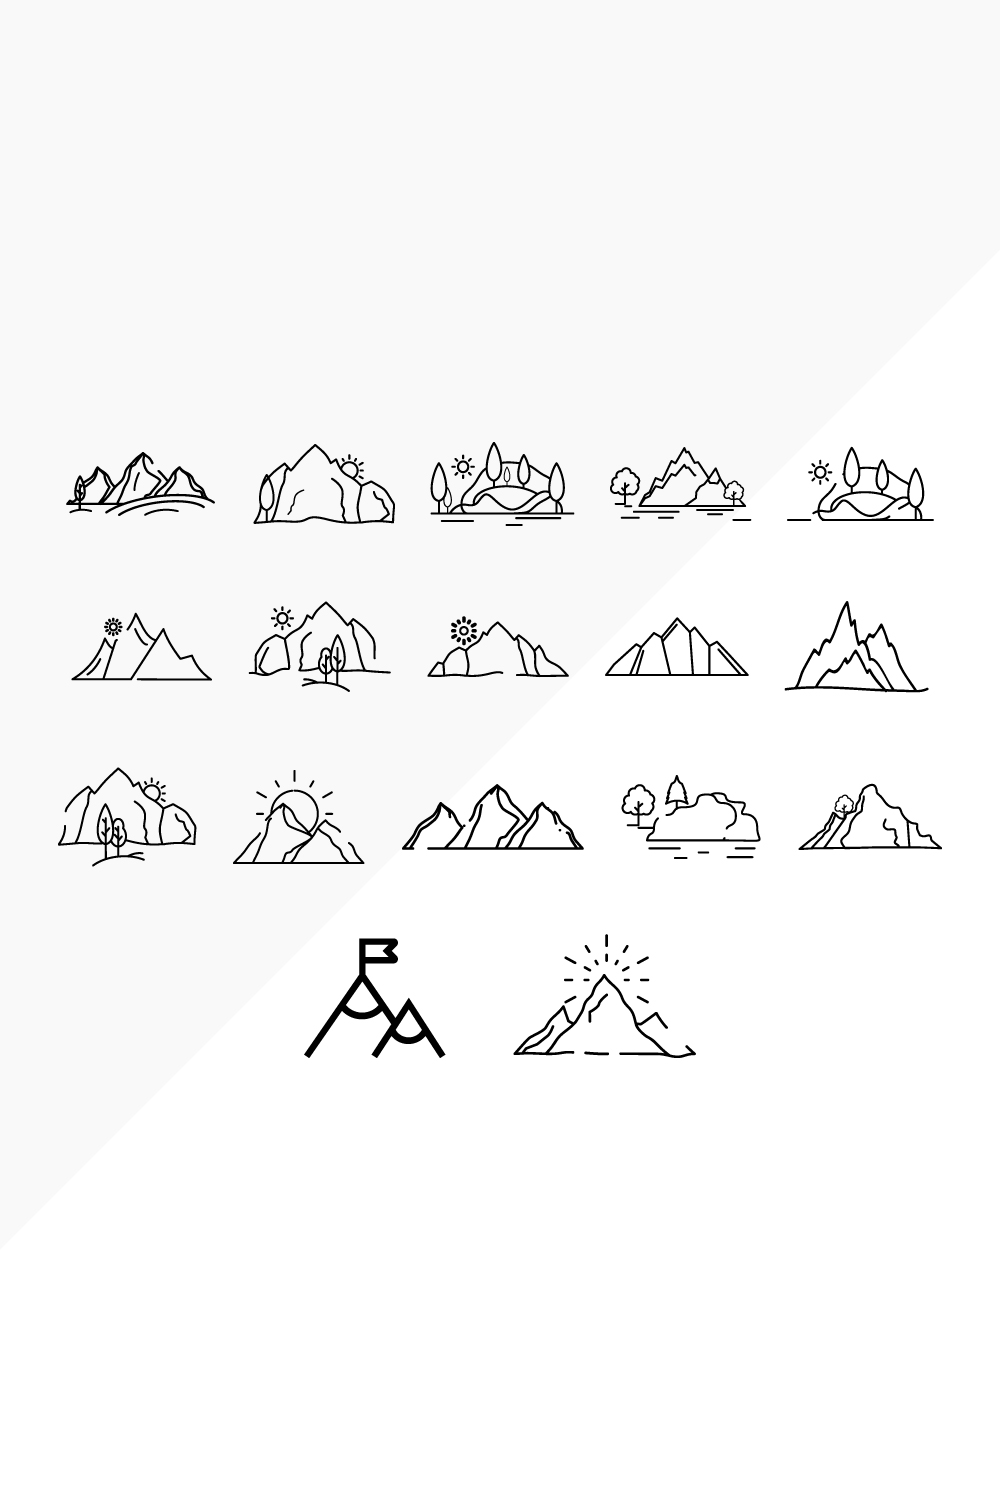 Hill Icons pinterest image.